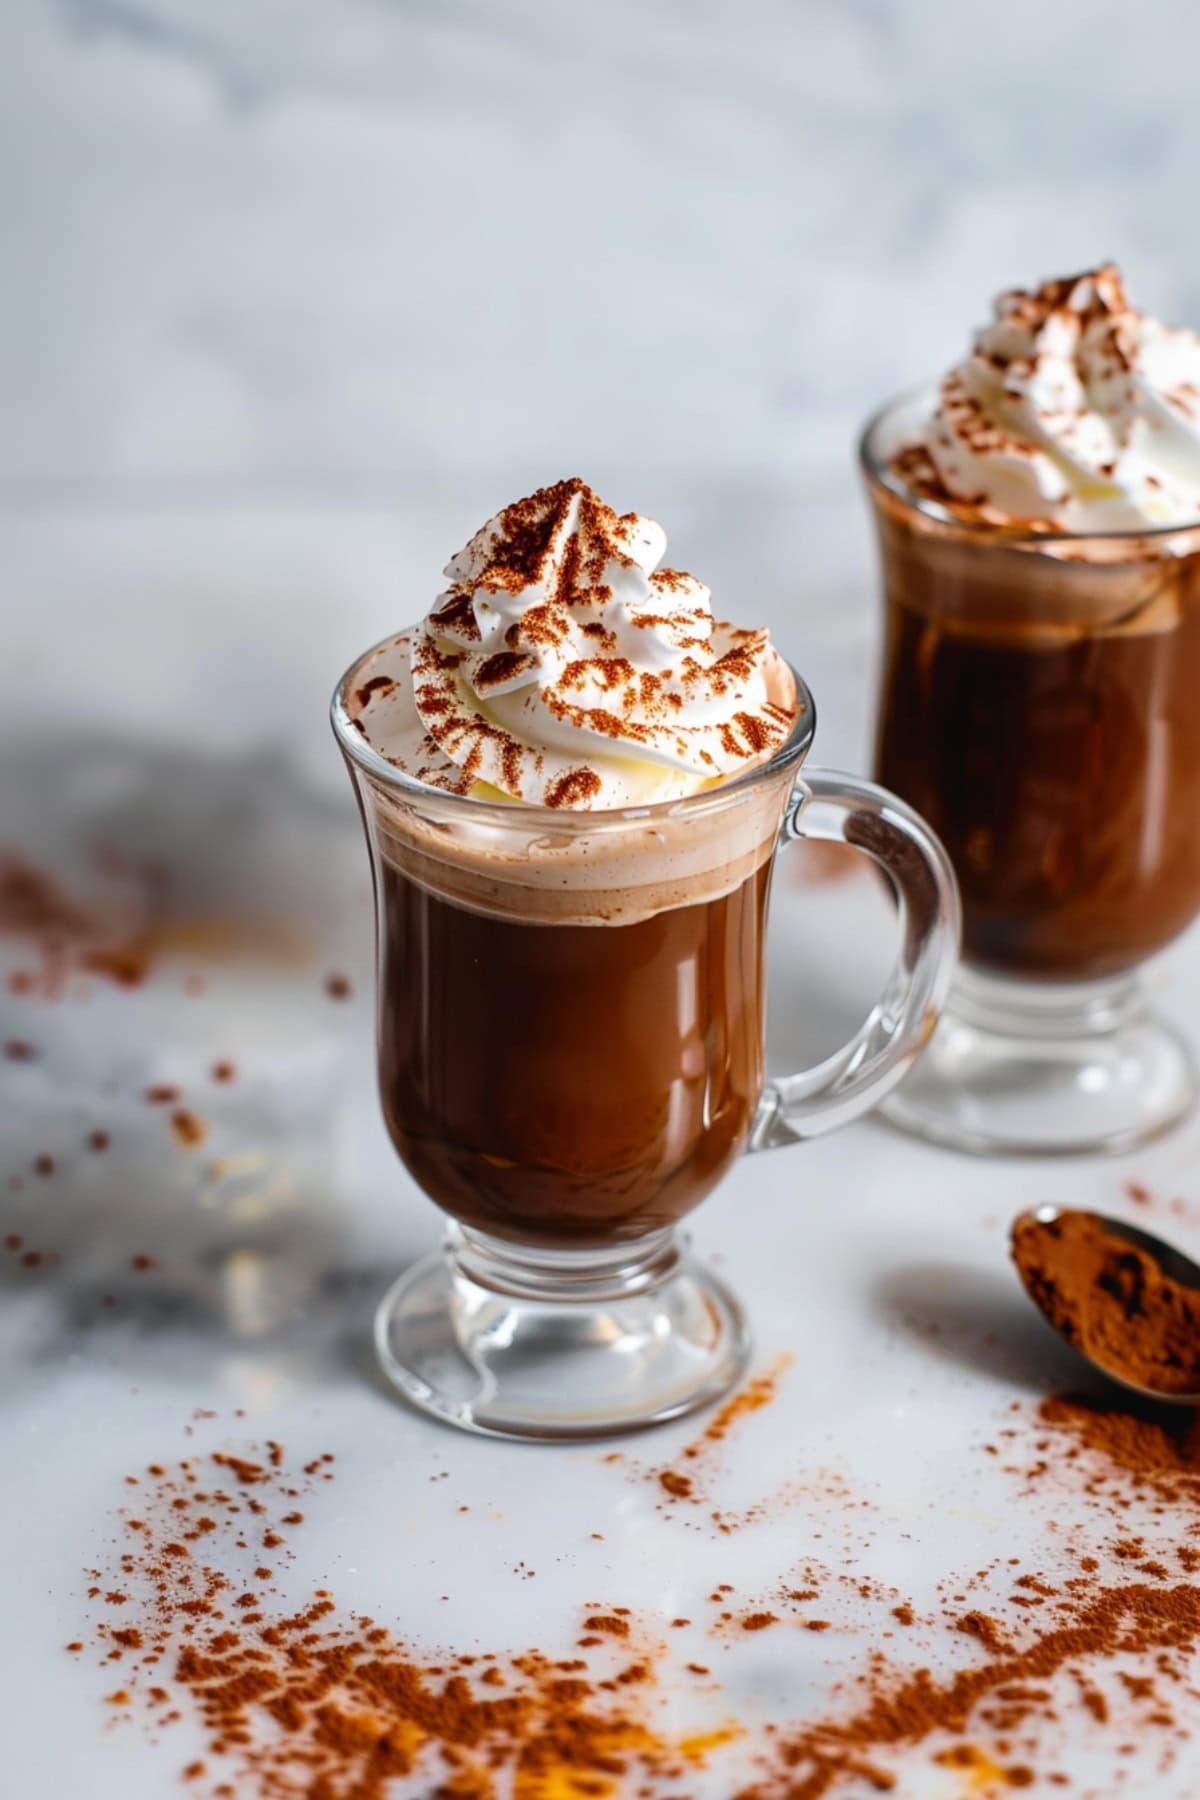 Cozy mugs of Kahlua-infused hot chocolate, topped with whipped cream and and cocoa powder